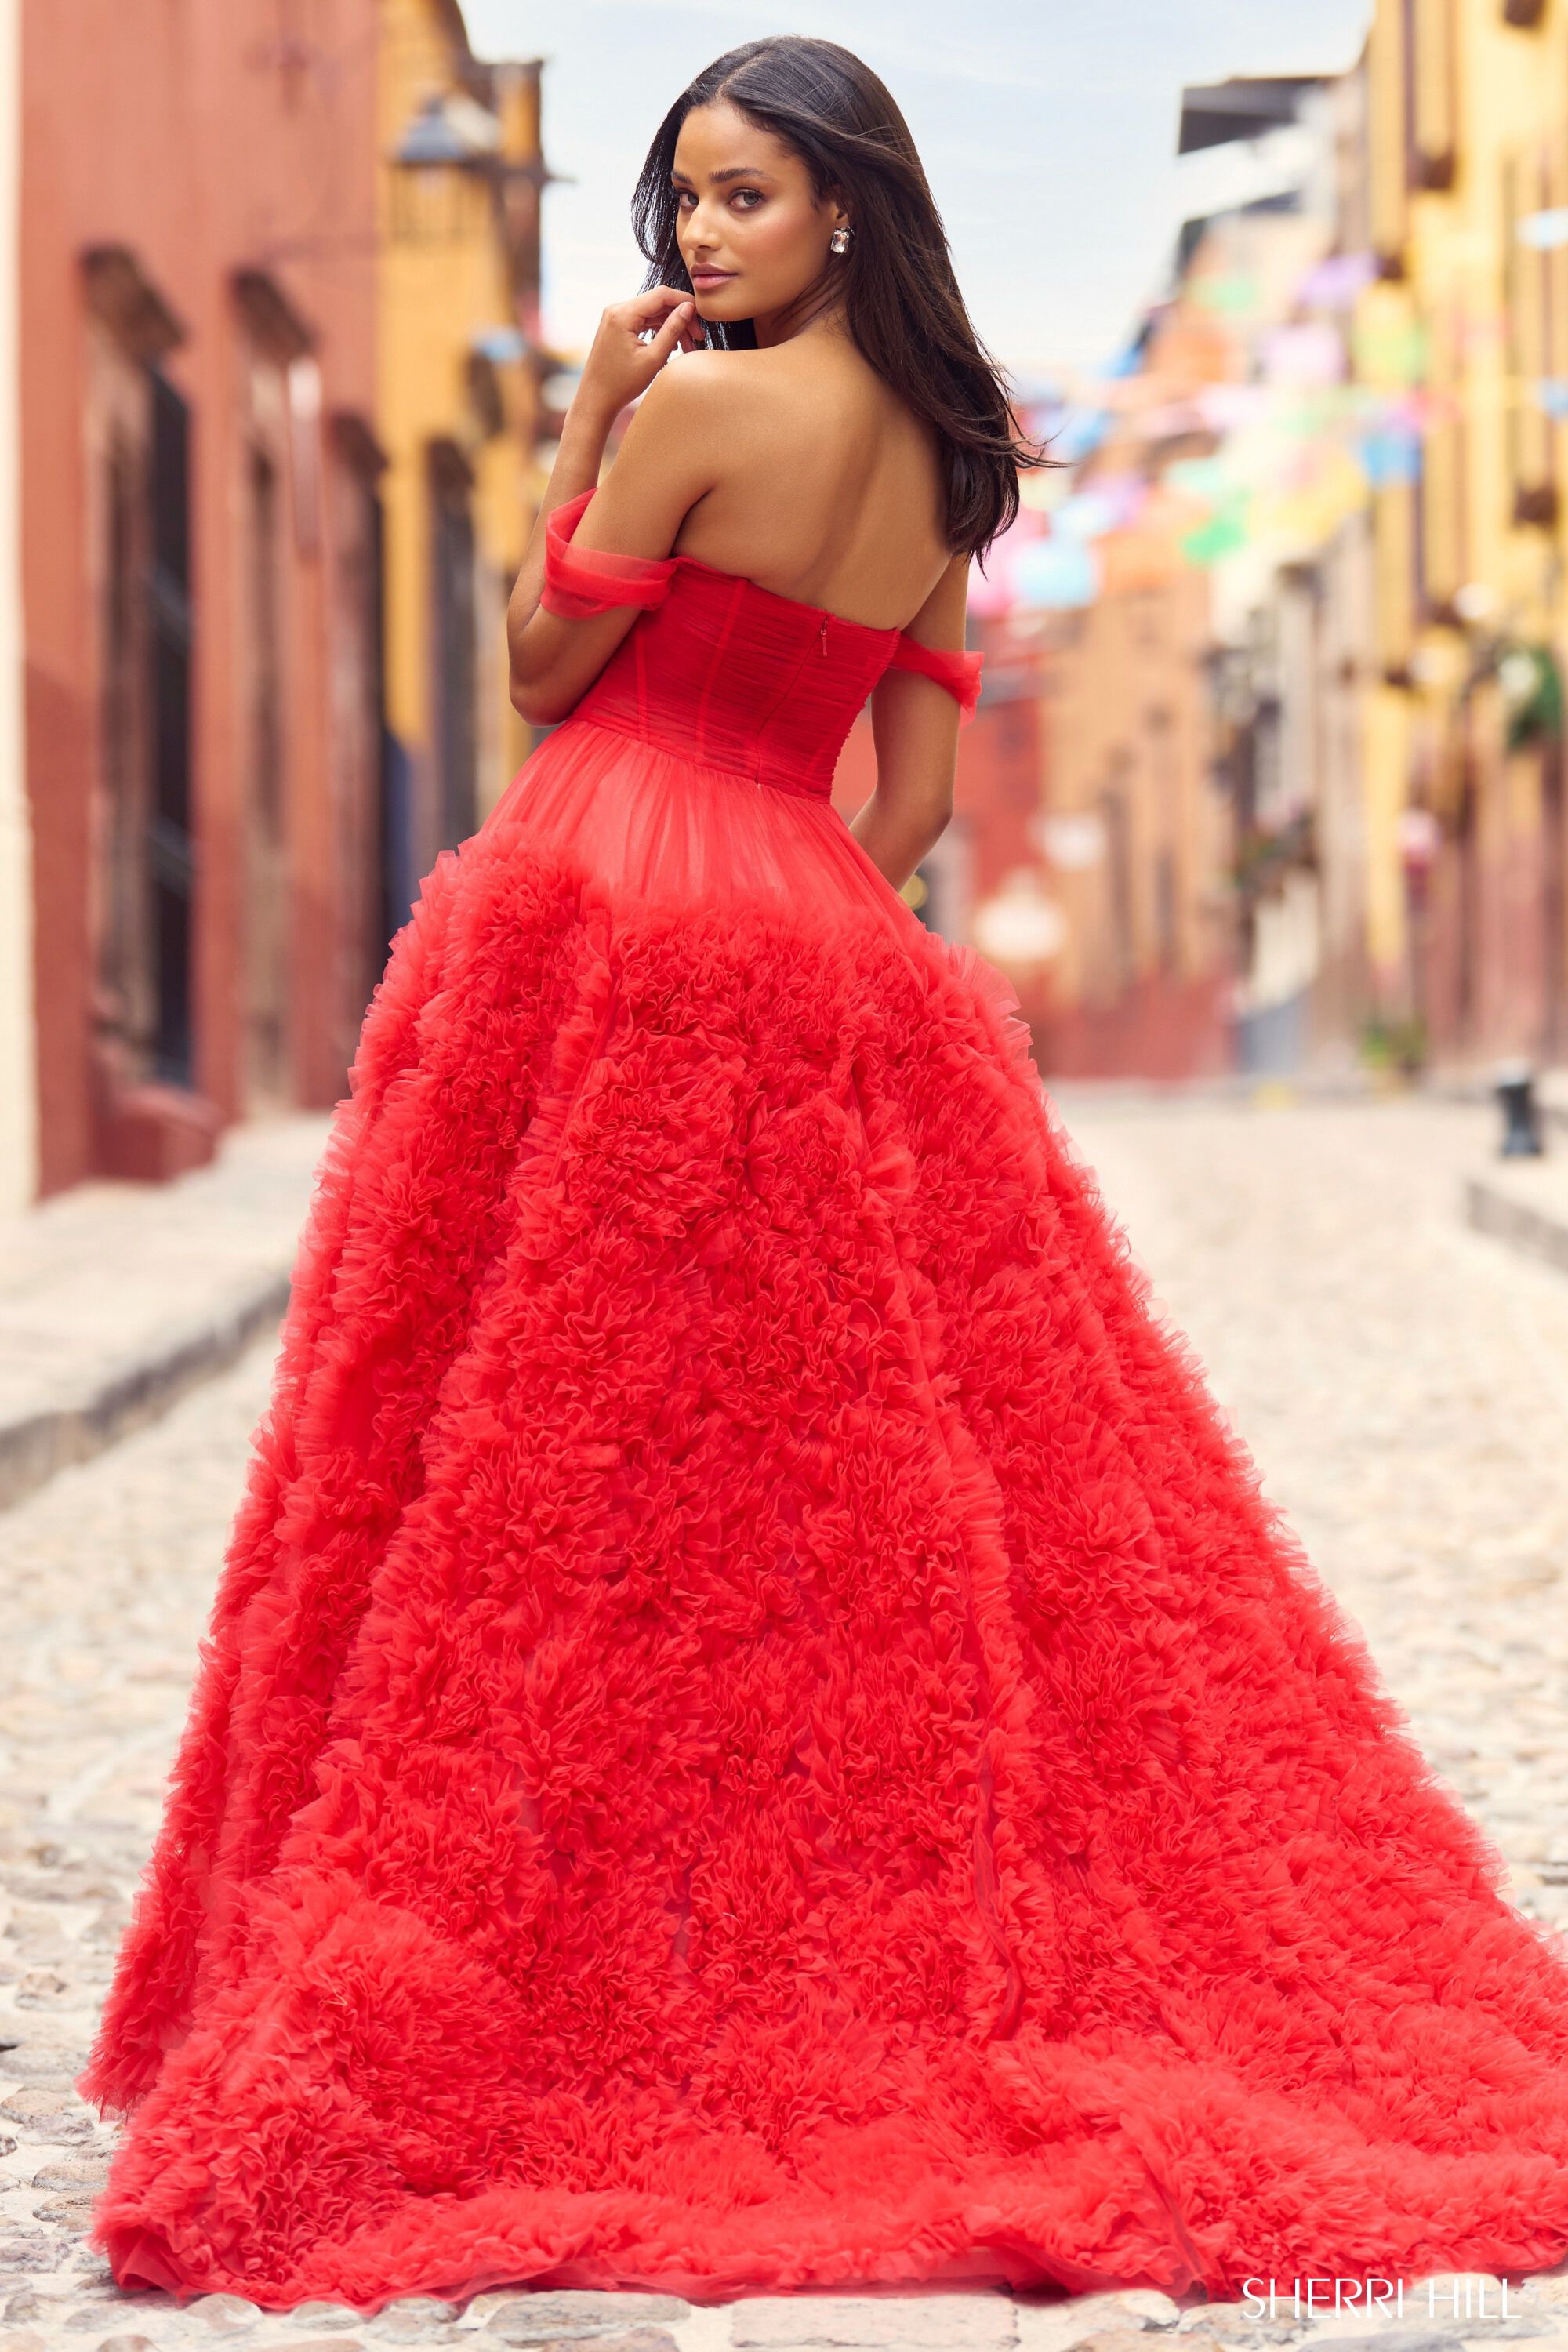 Wholesale Indian Red Princess Ball Gown Wedding Prom Dresses From  m.alibaba.com